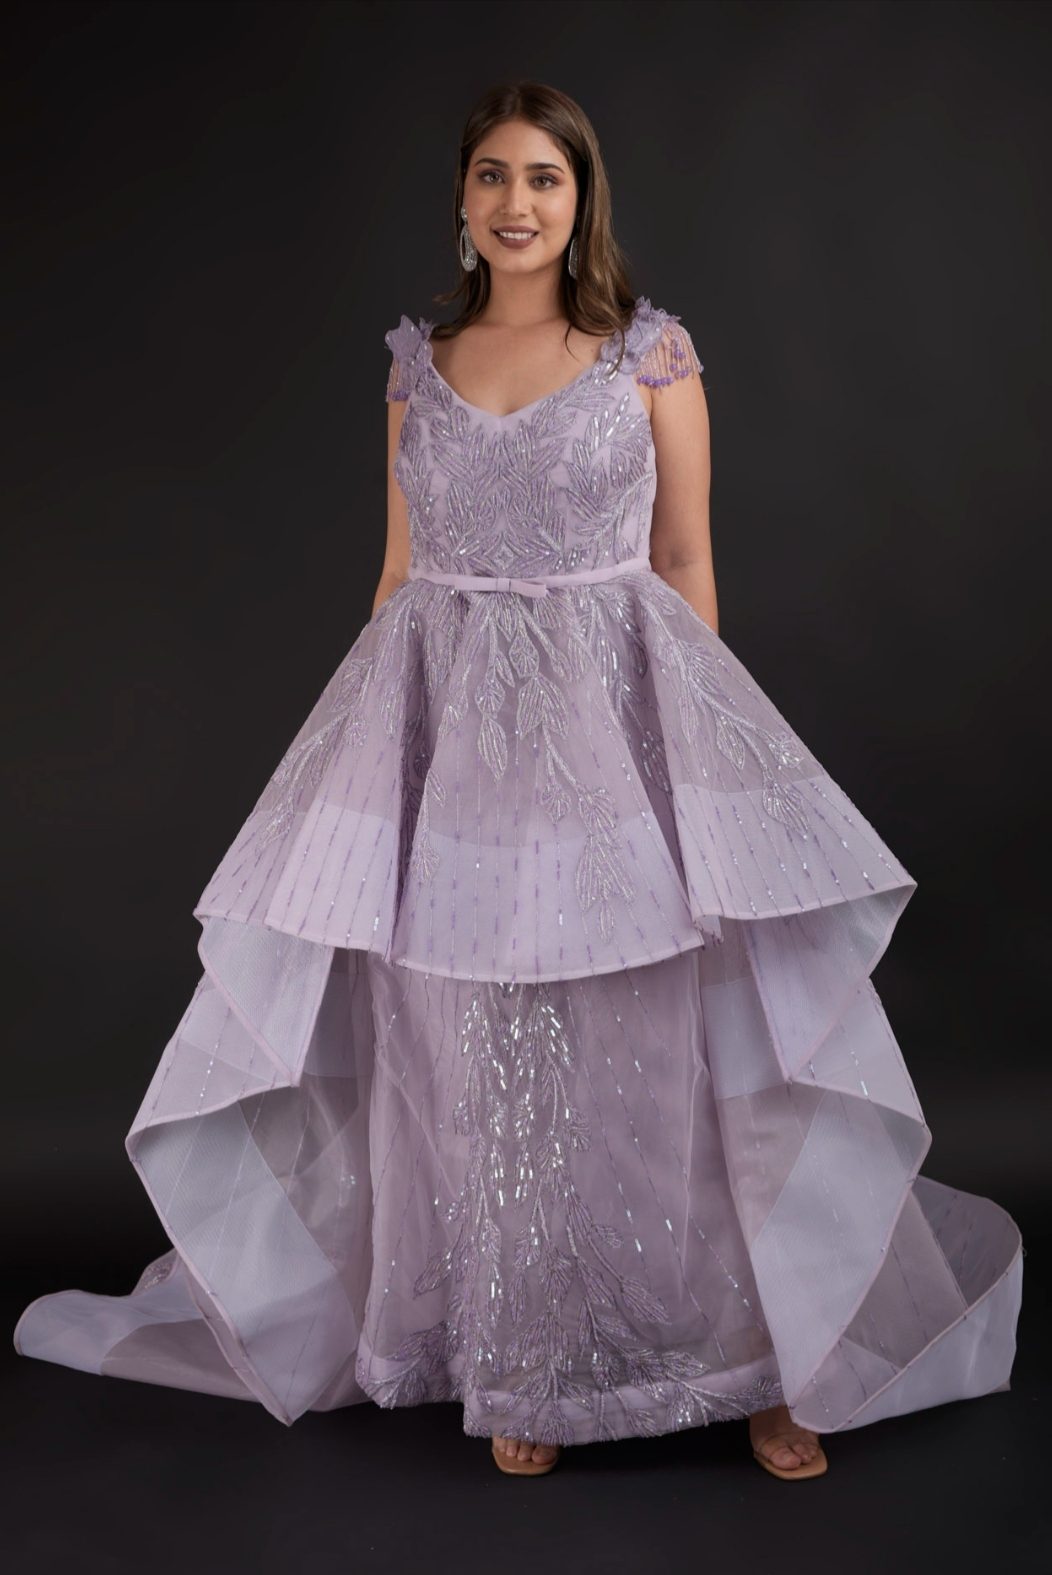 MAUVE DUAL-LAYER GOWN